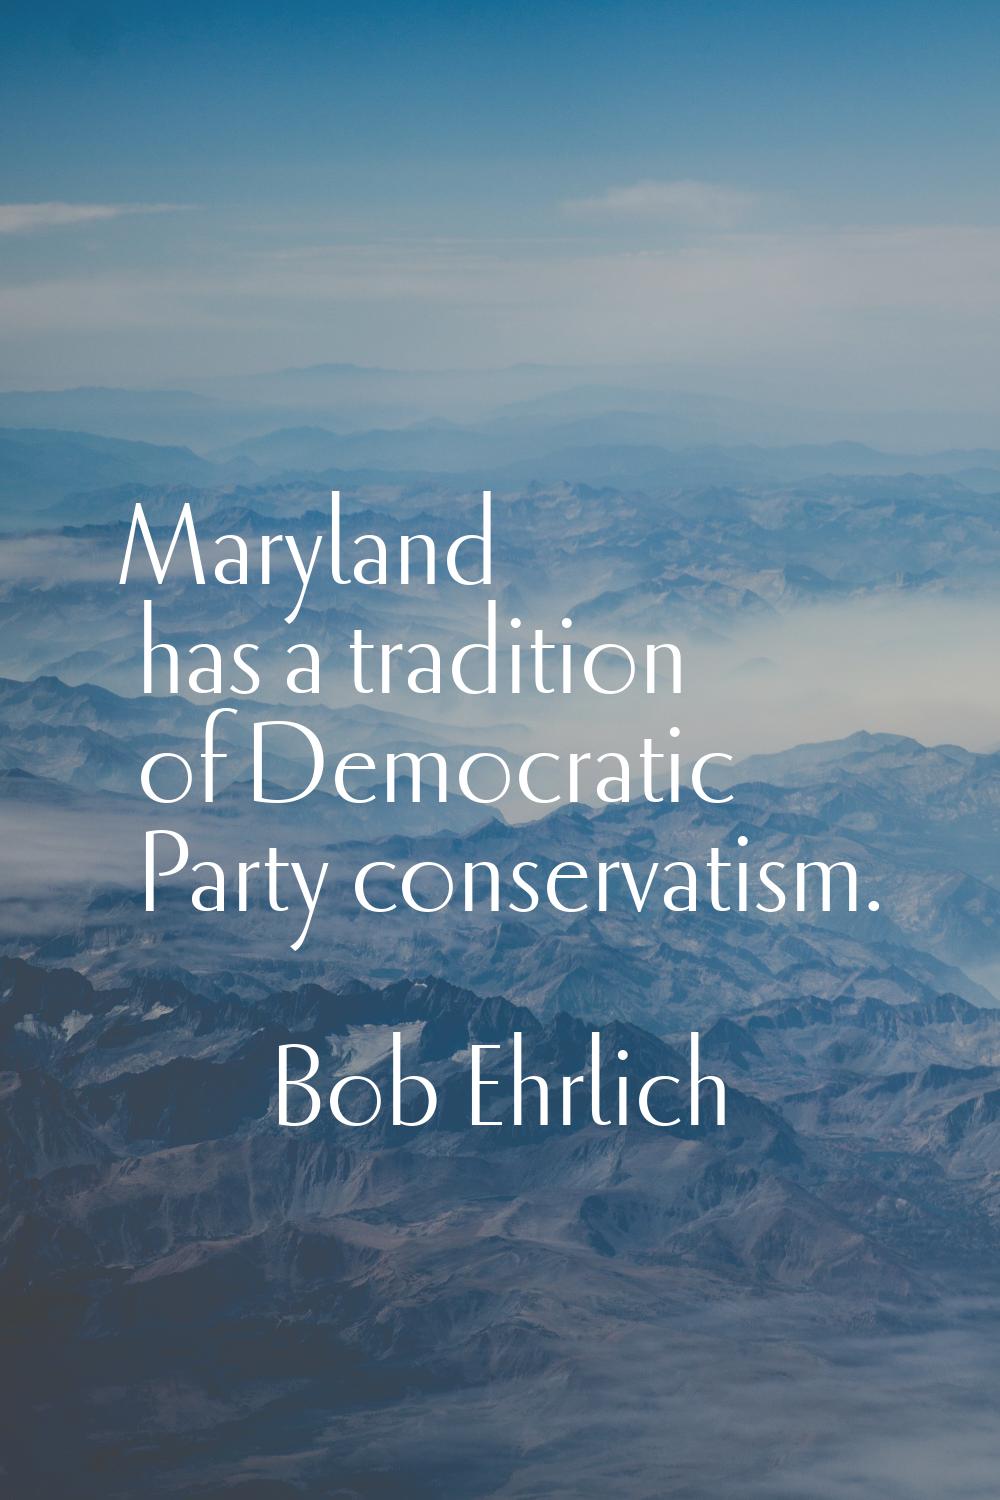 Maryland has a tradition of Democratic Party conservatism.